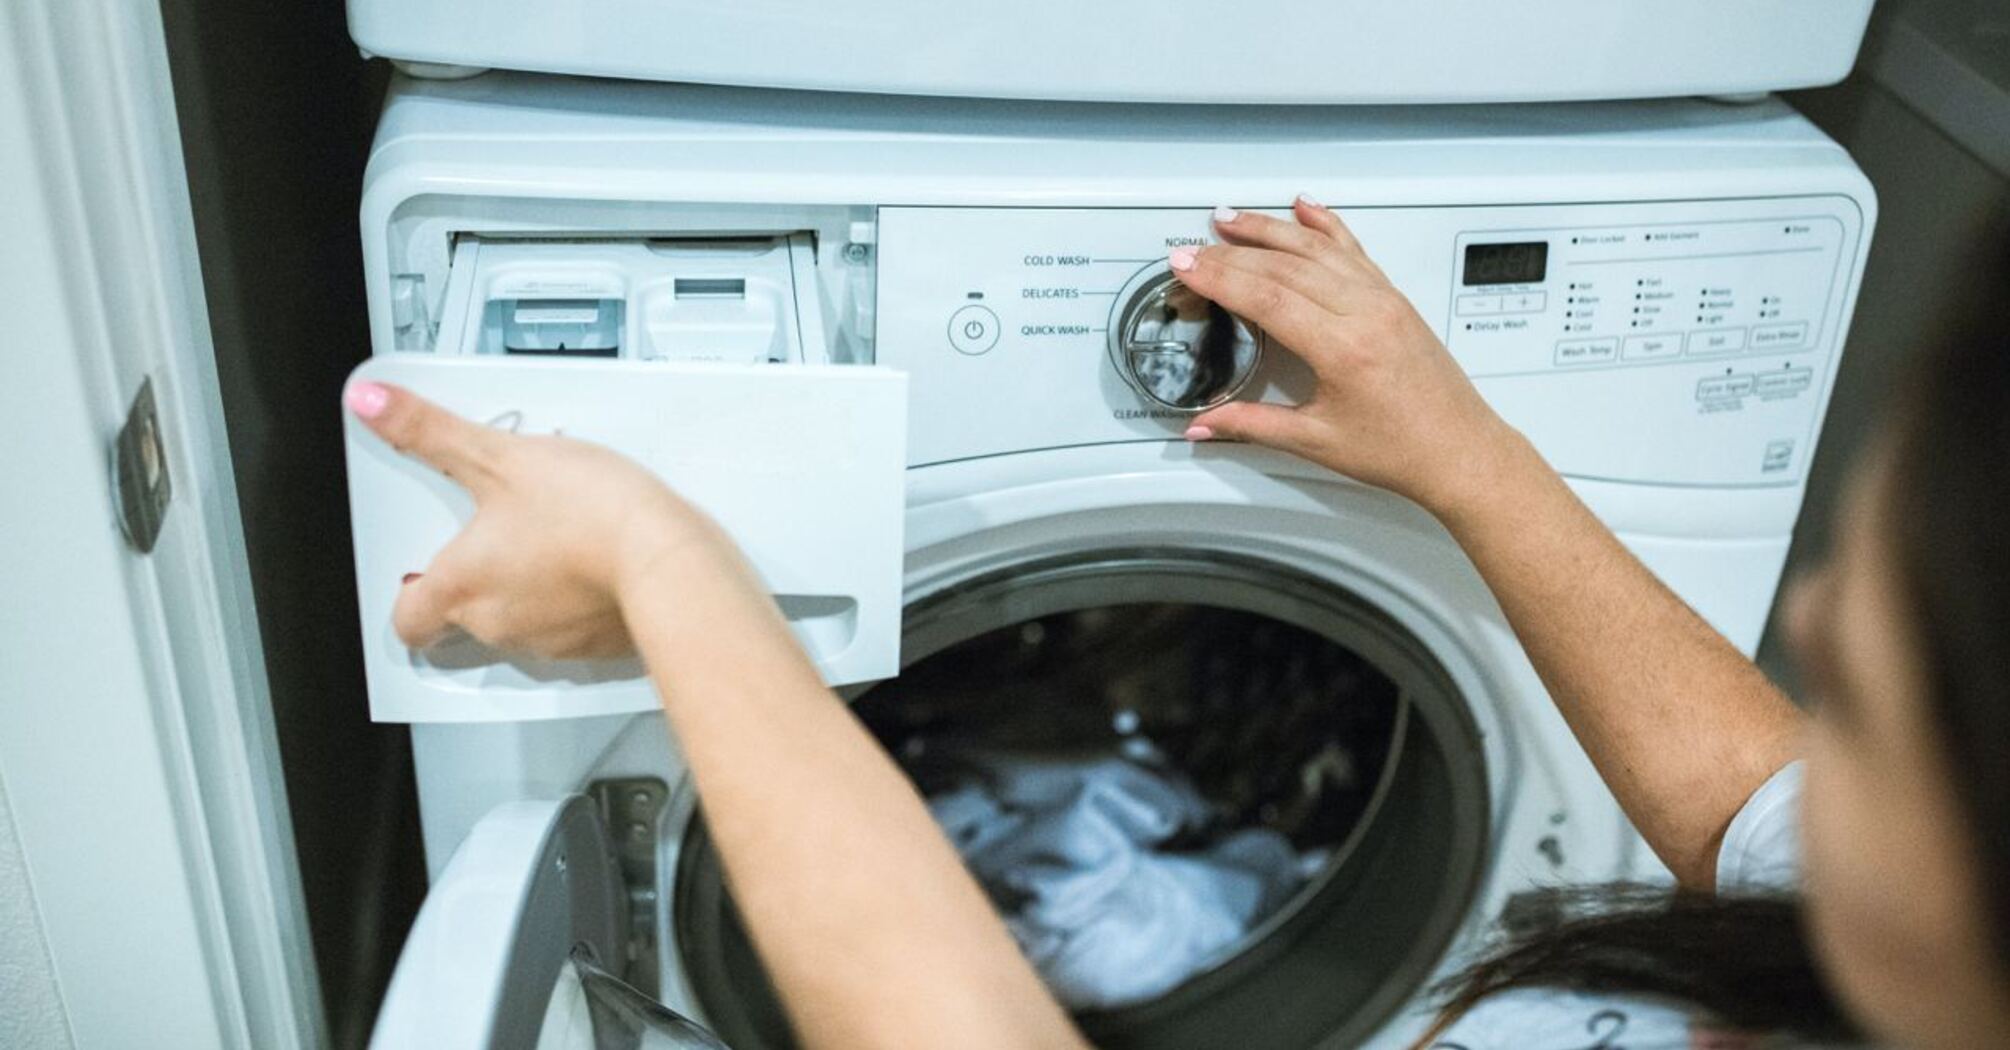 Which laundry detergent is better: powder or gel